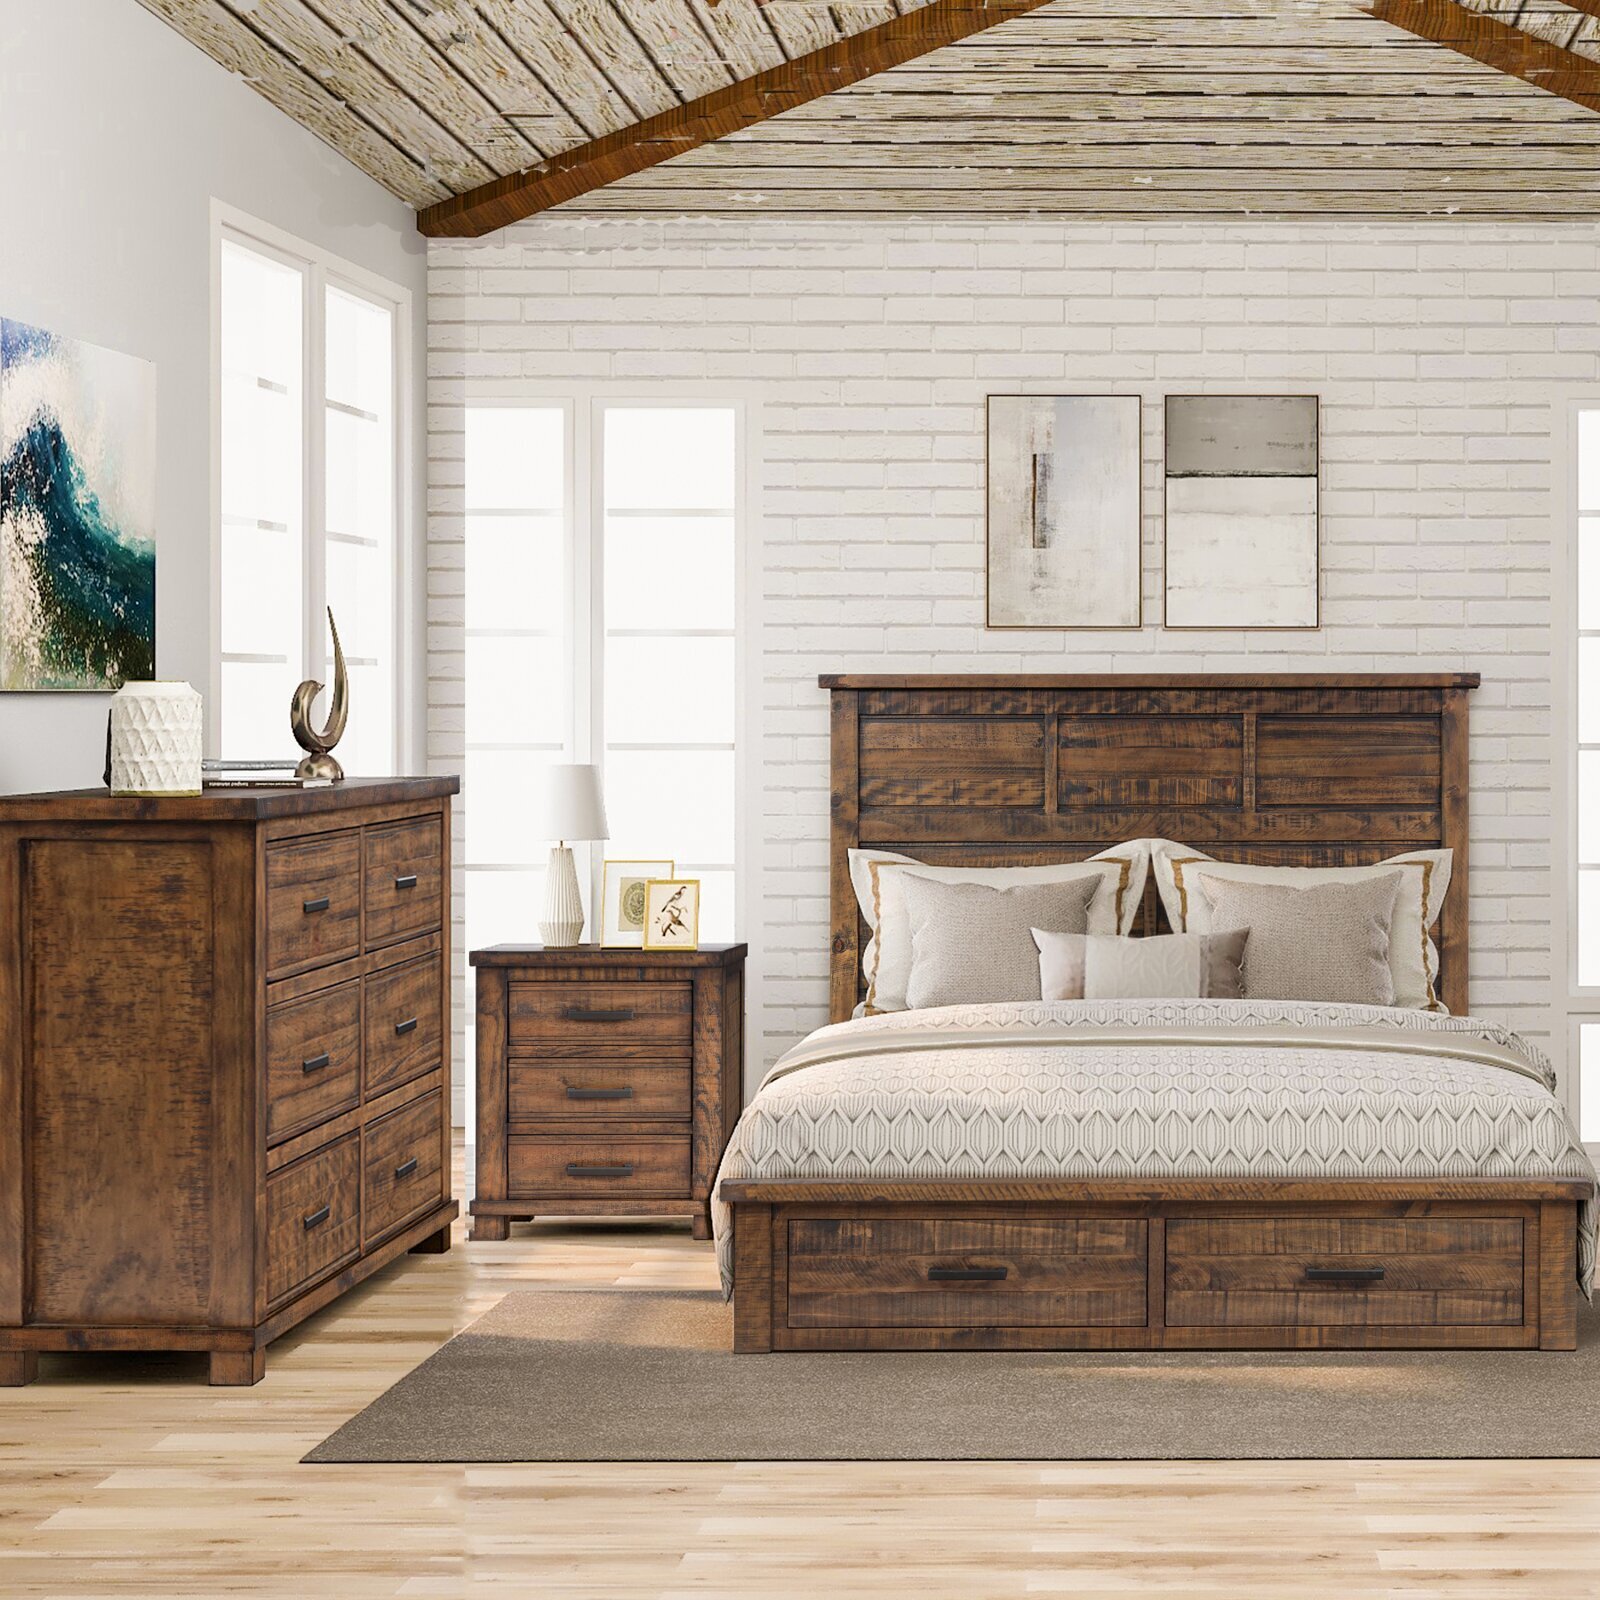 Distressed wood bedroom furniture with wrought iron accents